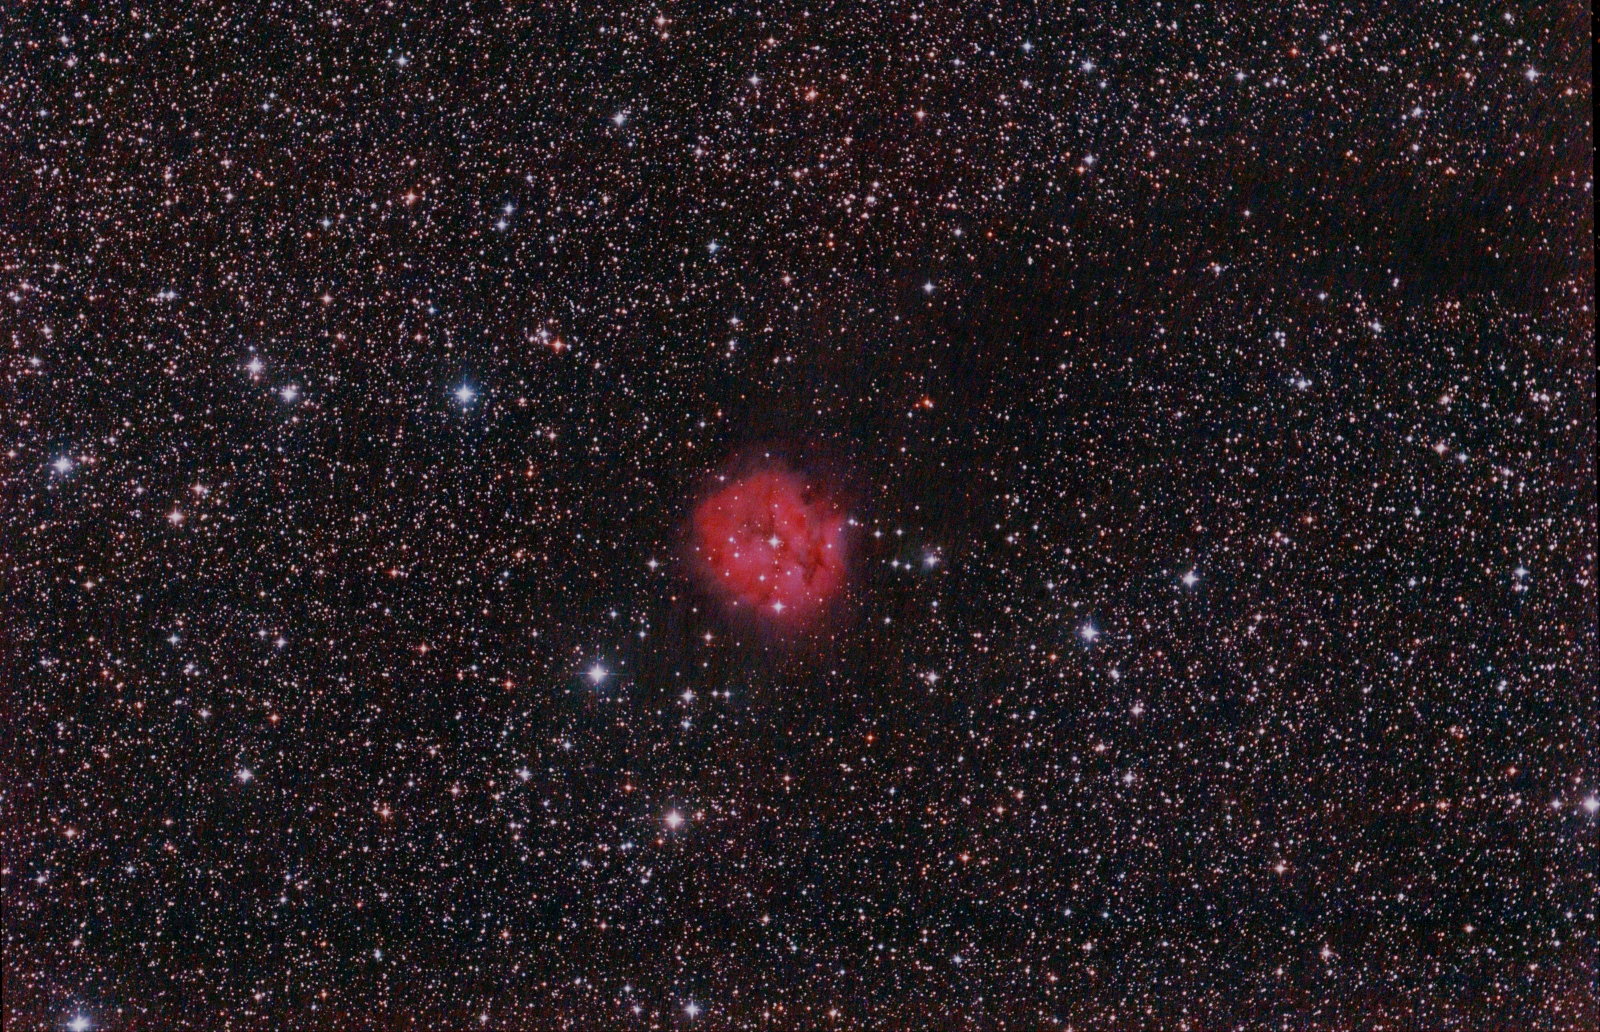 IC5146 Cocoon-nebula + Barnard 168 in Cygnus 2h Idas V4-filter June 5th 2022 + 2h 20min Optolong lpro-filter 21th 2022; 8" f/4 newtonian; mod. Canon 600d;more stretched!